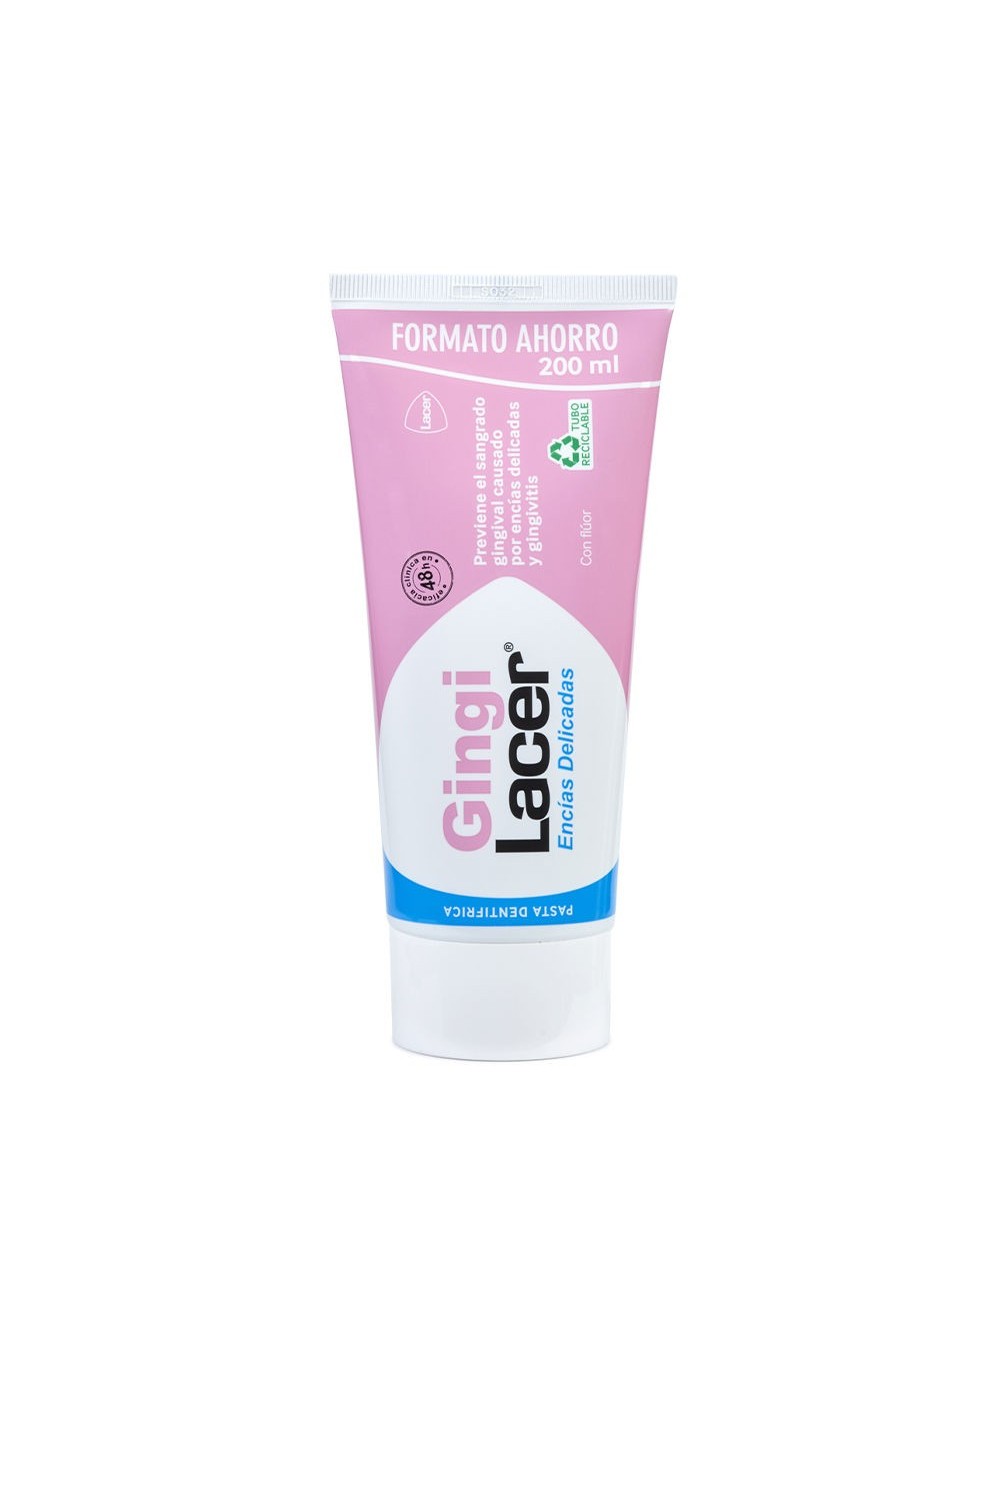 Lacer Gingilacer Toothpaste 200ml